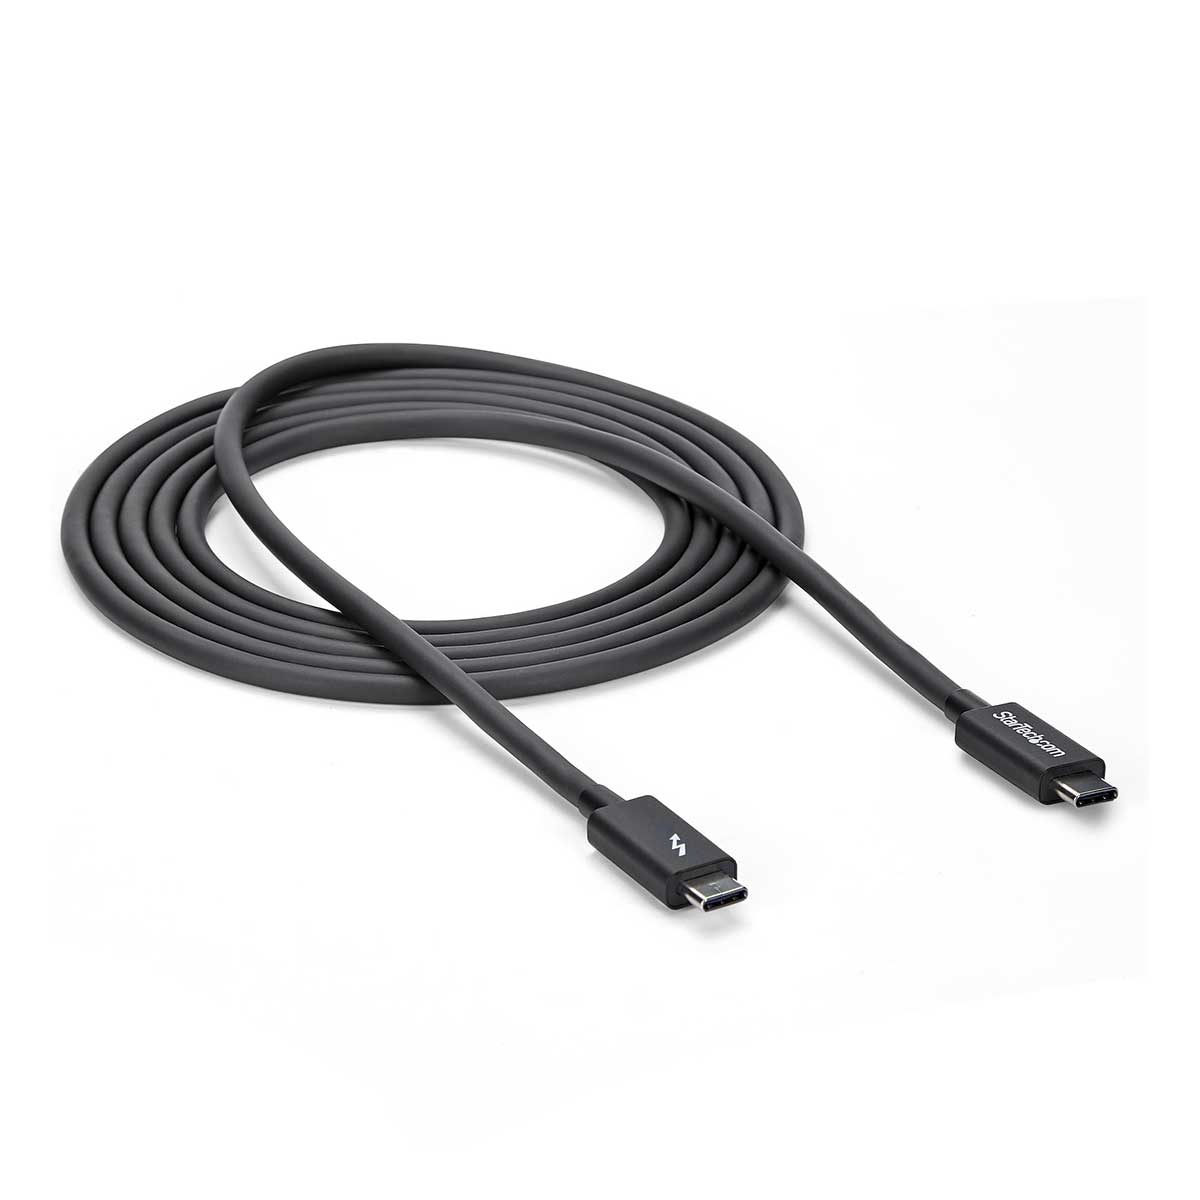 Startech 2m Thunderbolt 3 (20Gbps) USB-C Cable - Thunderbolt, USB, and DisplayPort Compatible